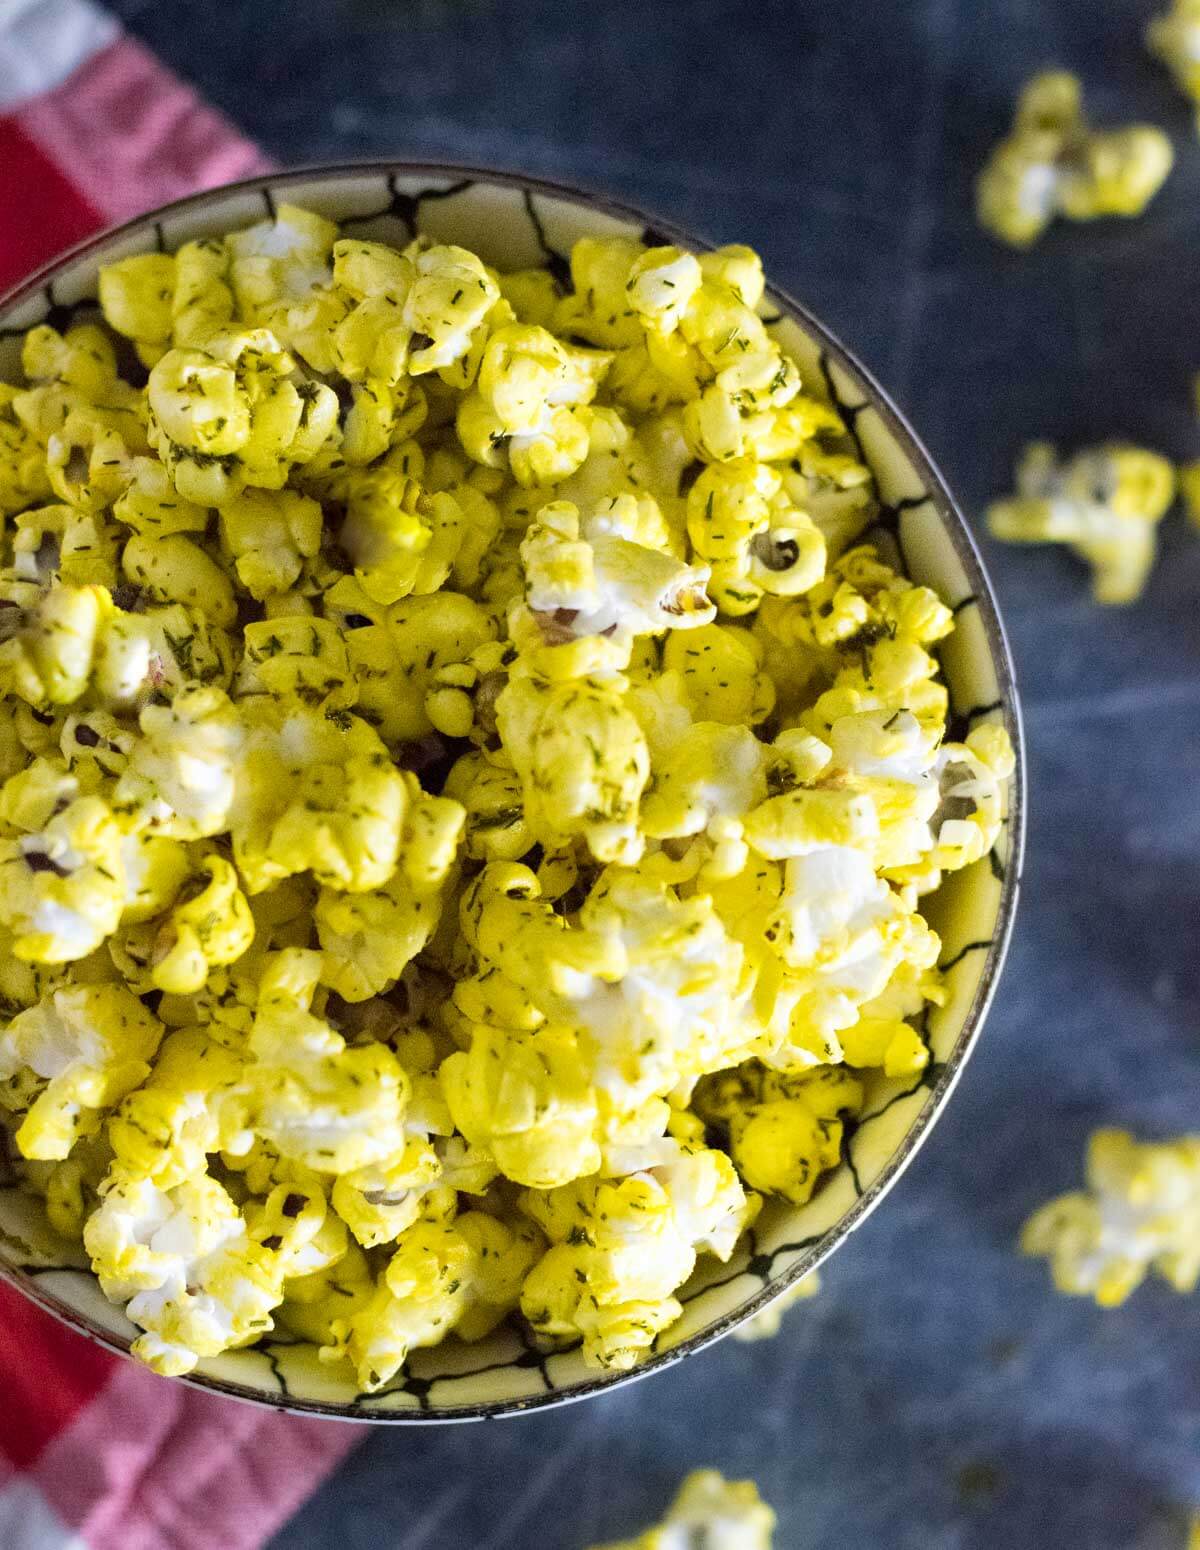 Serving dill pickle popcorn.